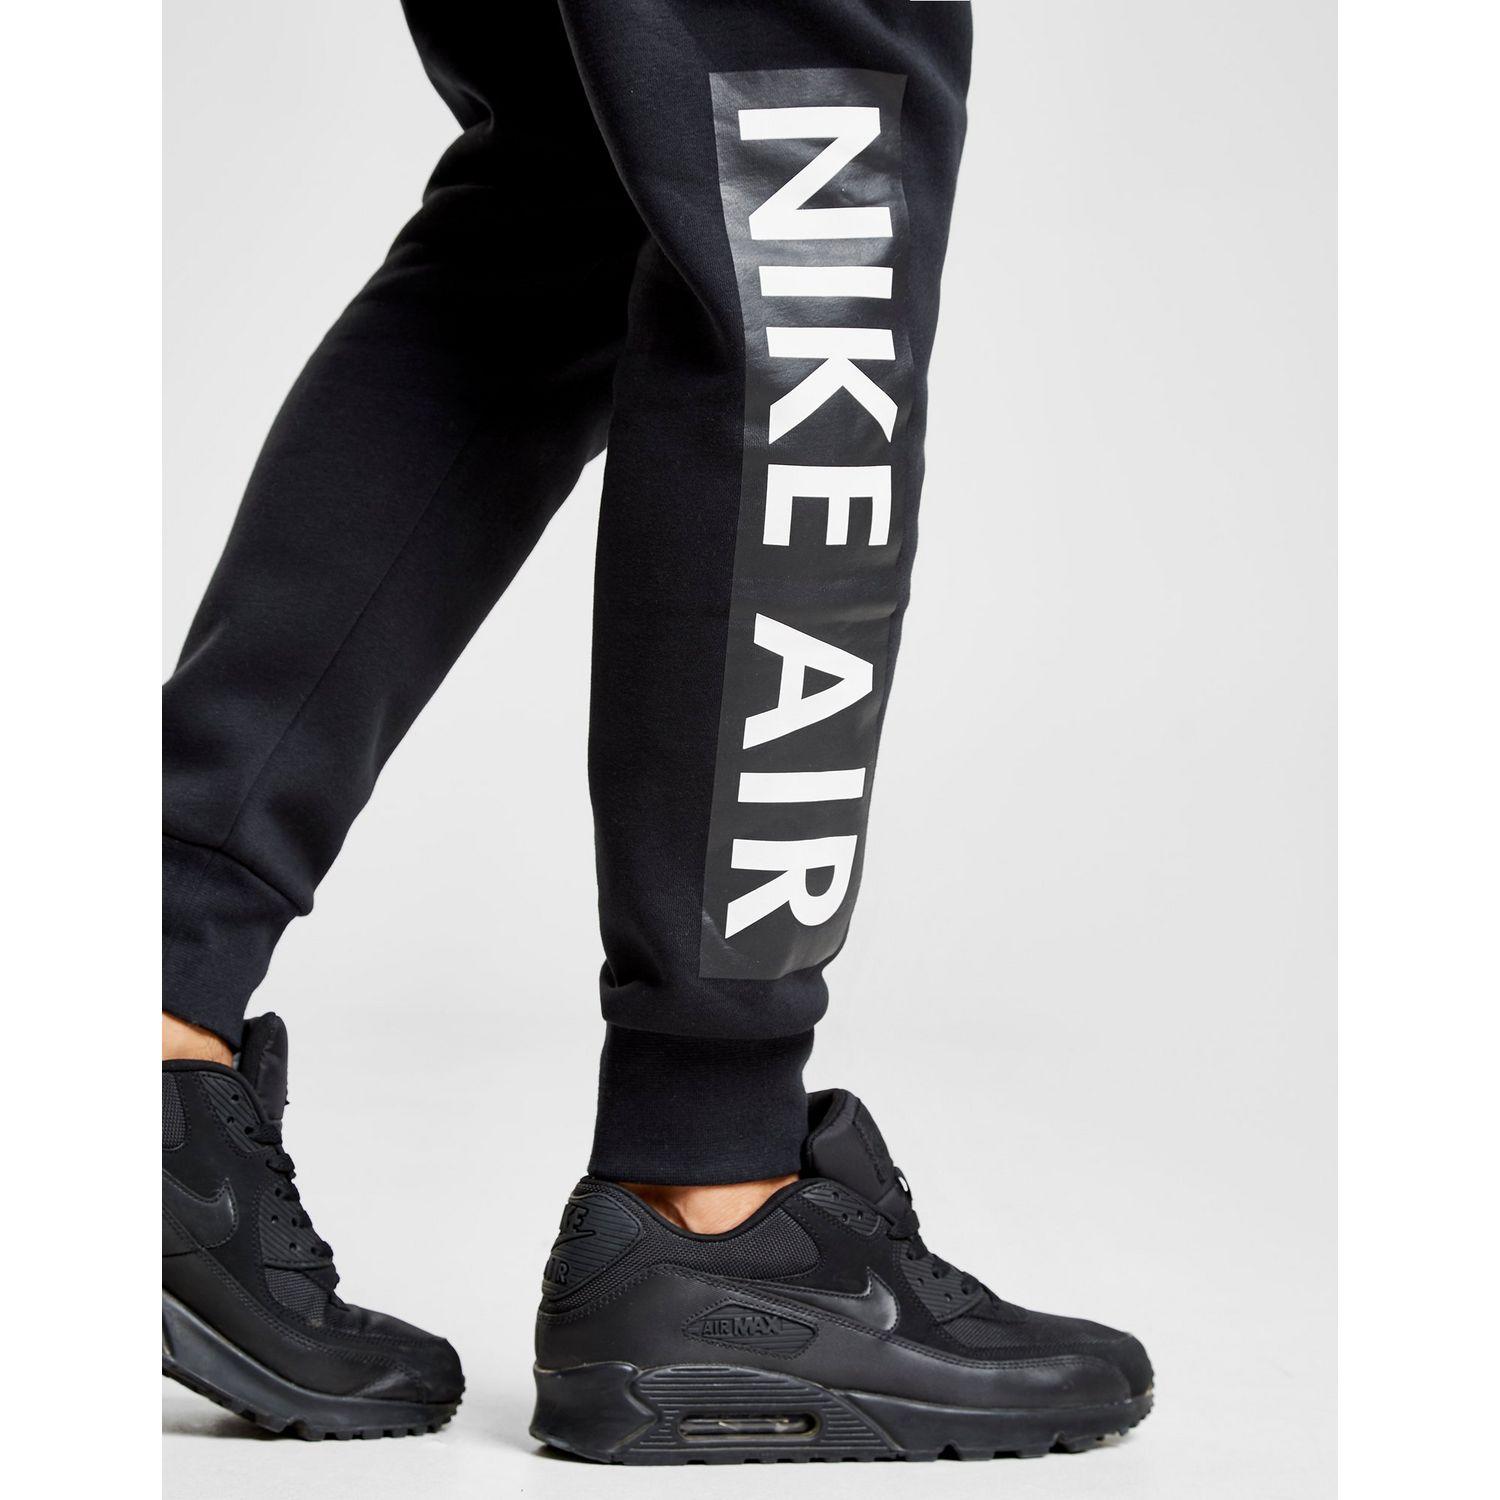 Nike Cotton Air Logo Track Pants in 